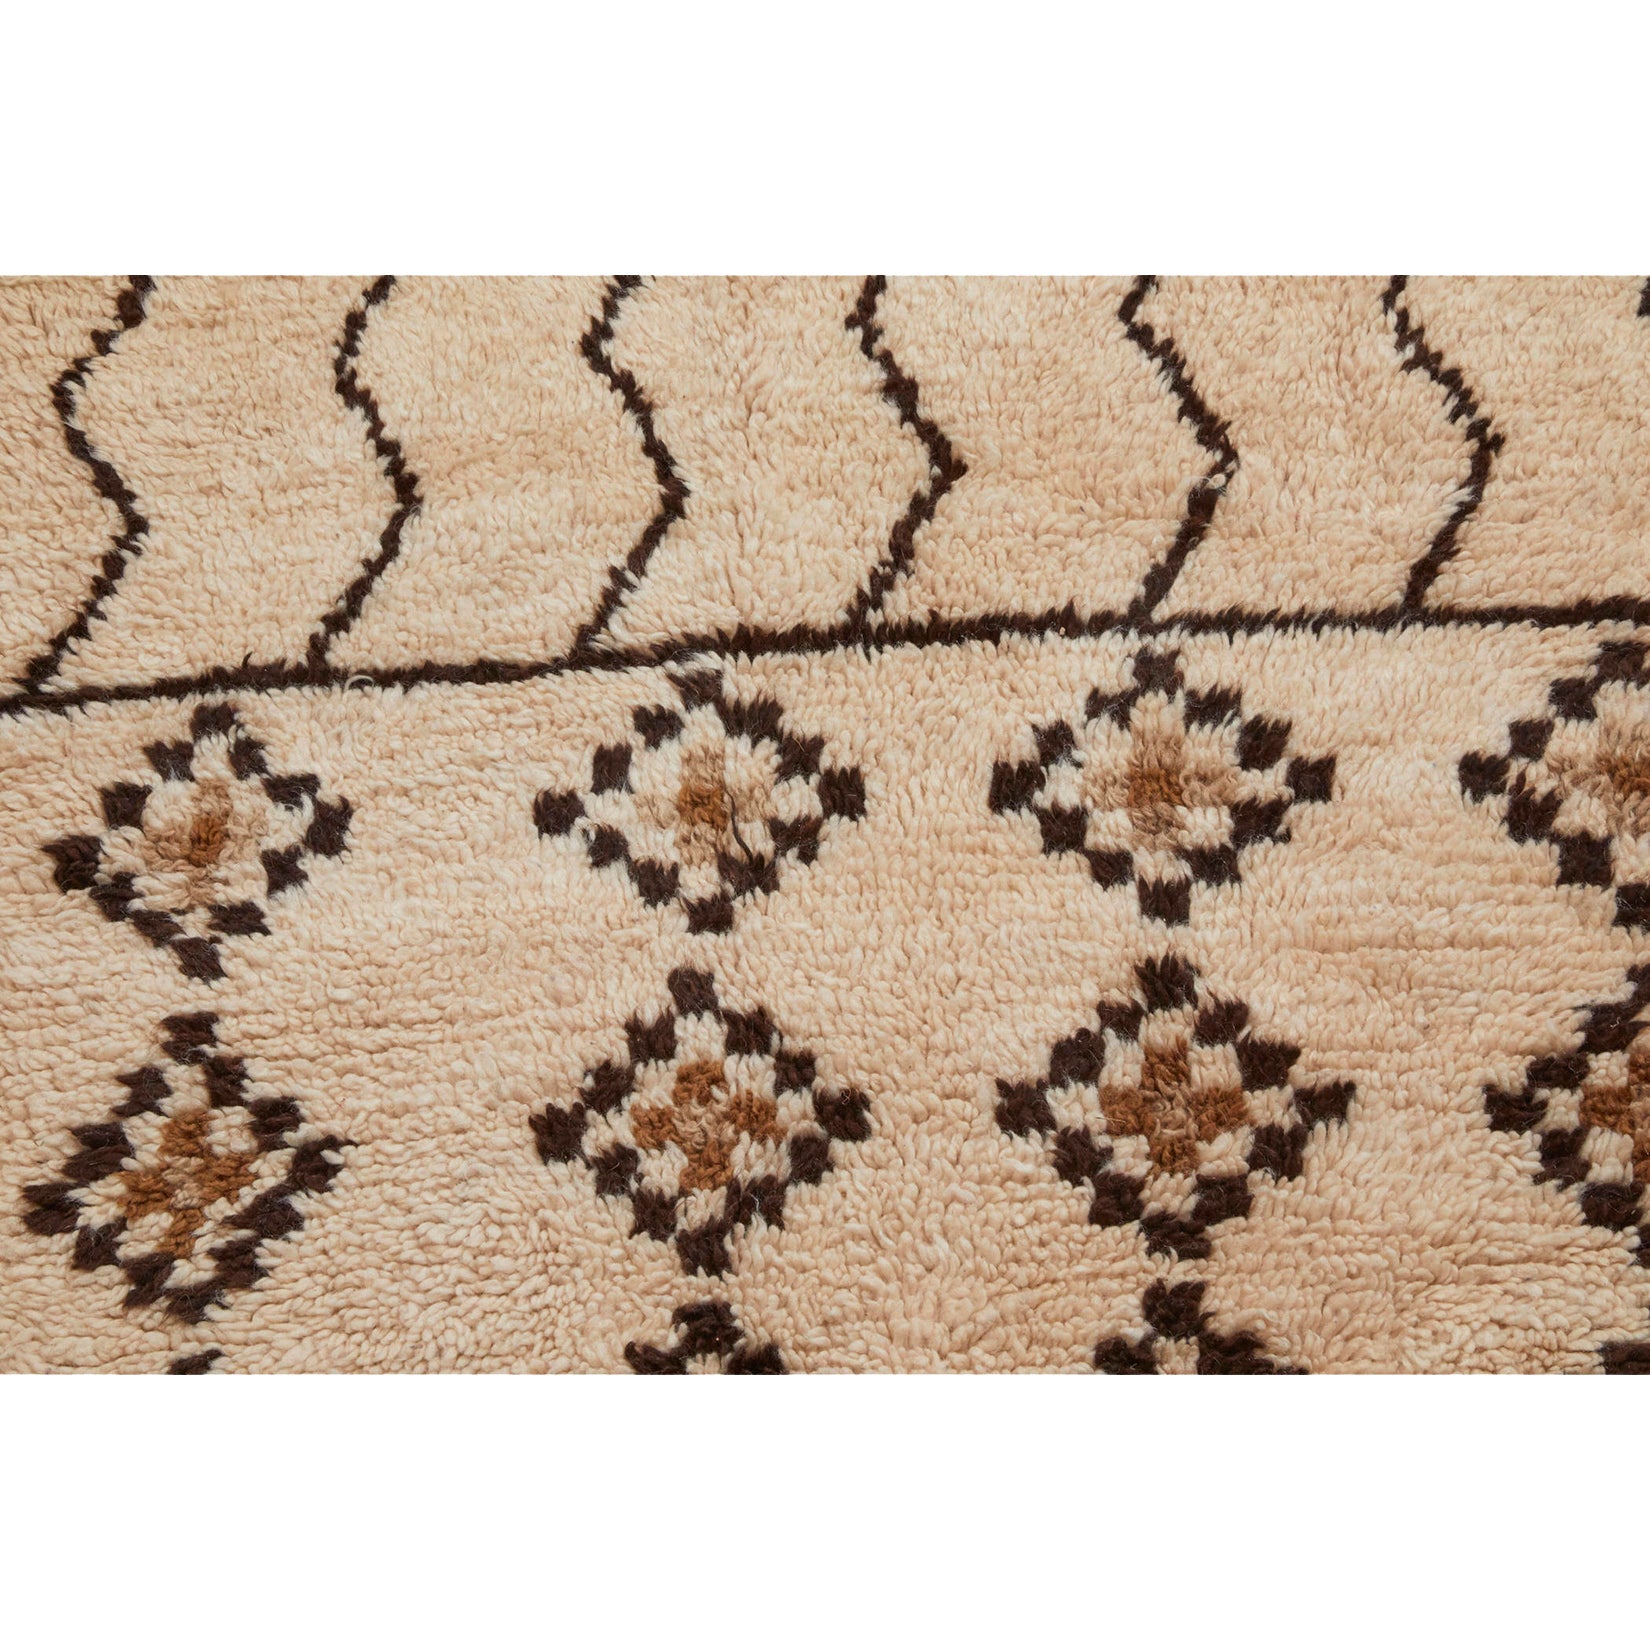 Cream colored Moroccan Azilal rug with tribal motifs in brown - Kantara | Moroccan Rugs